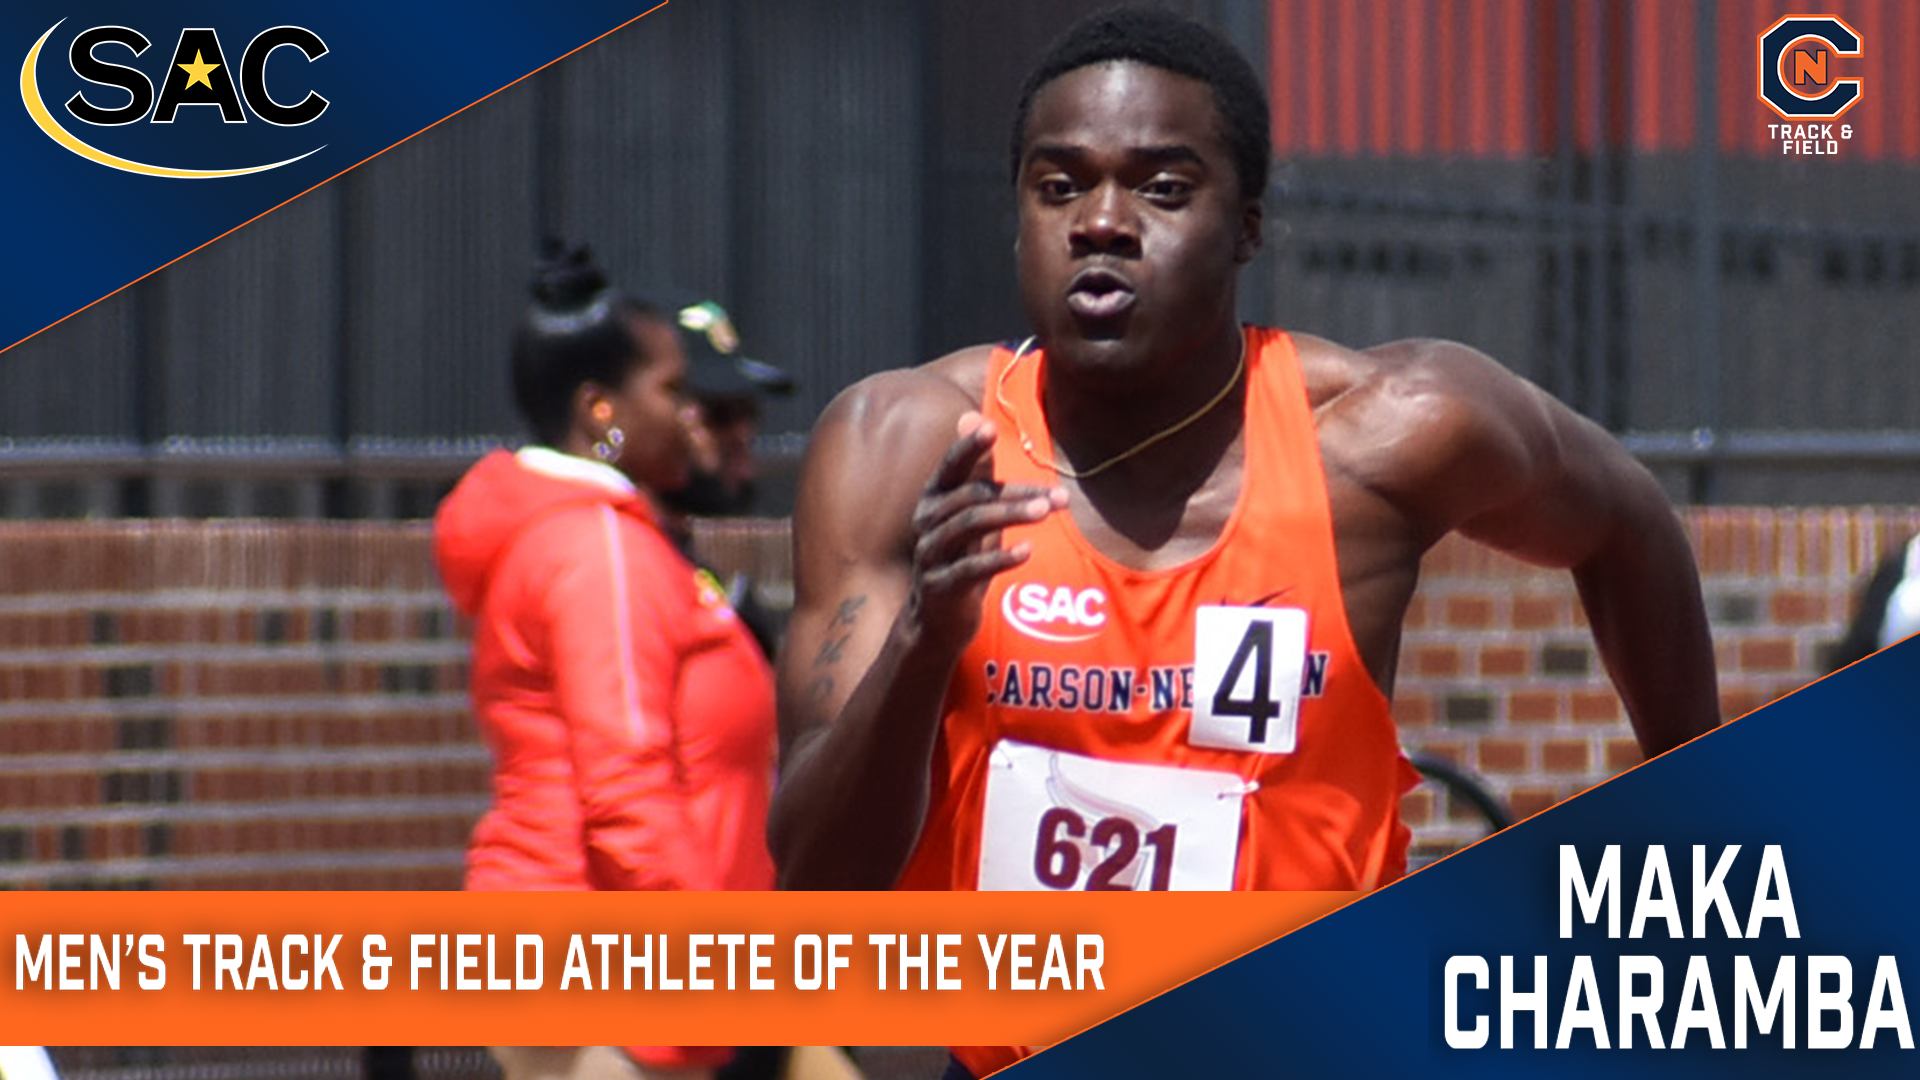 Charamba named SAC Men's Track & Field Athlete of the Year